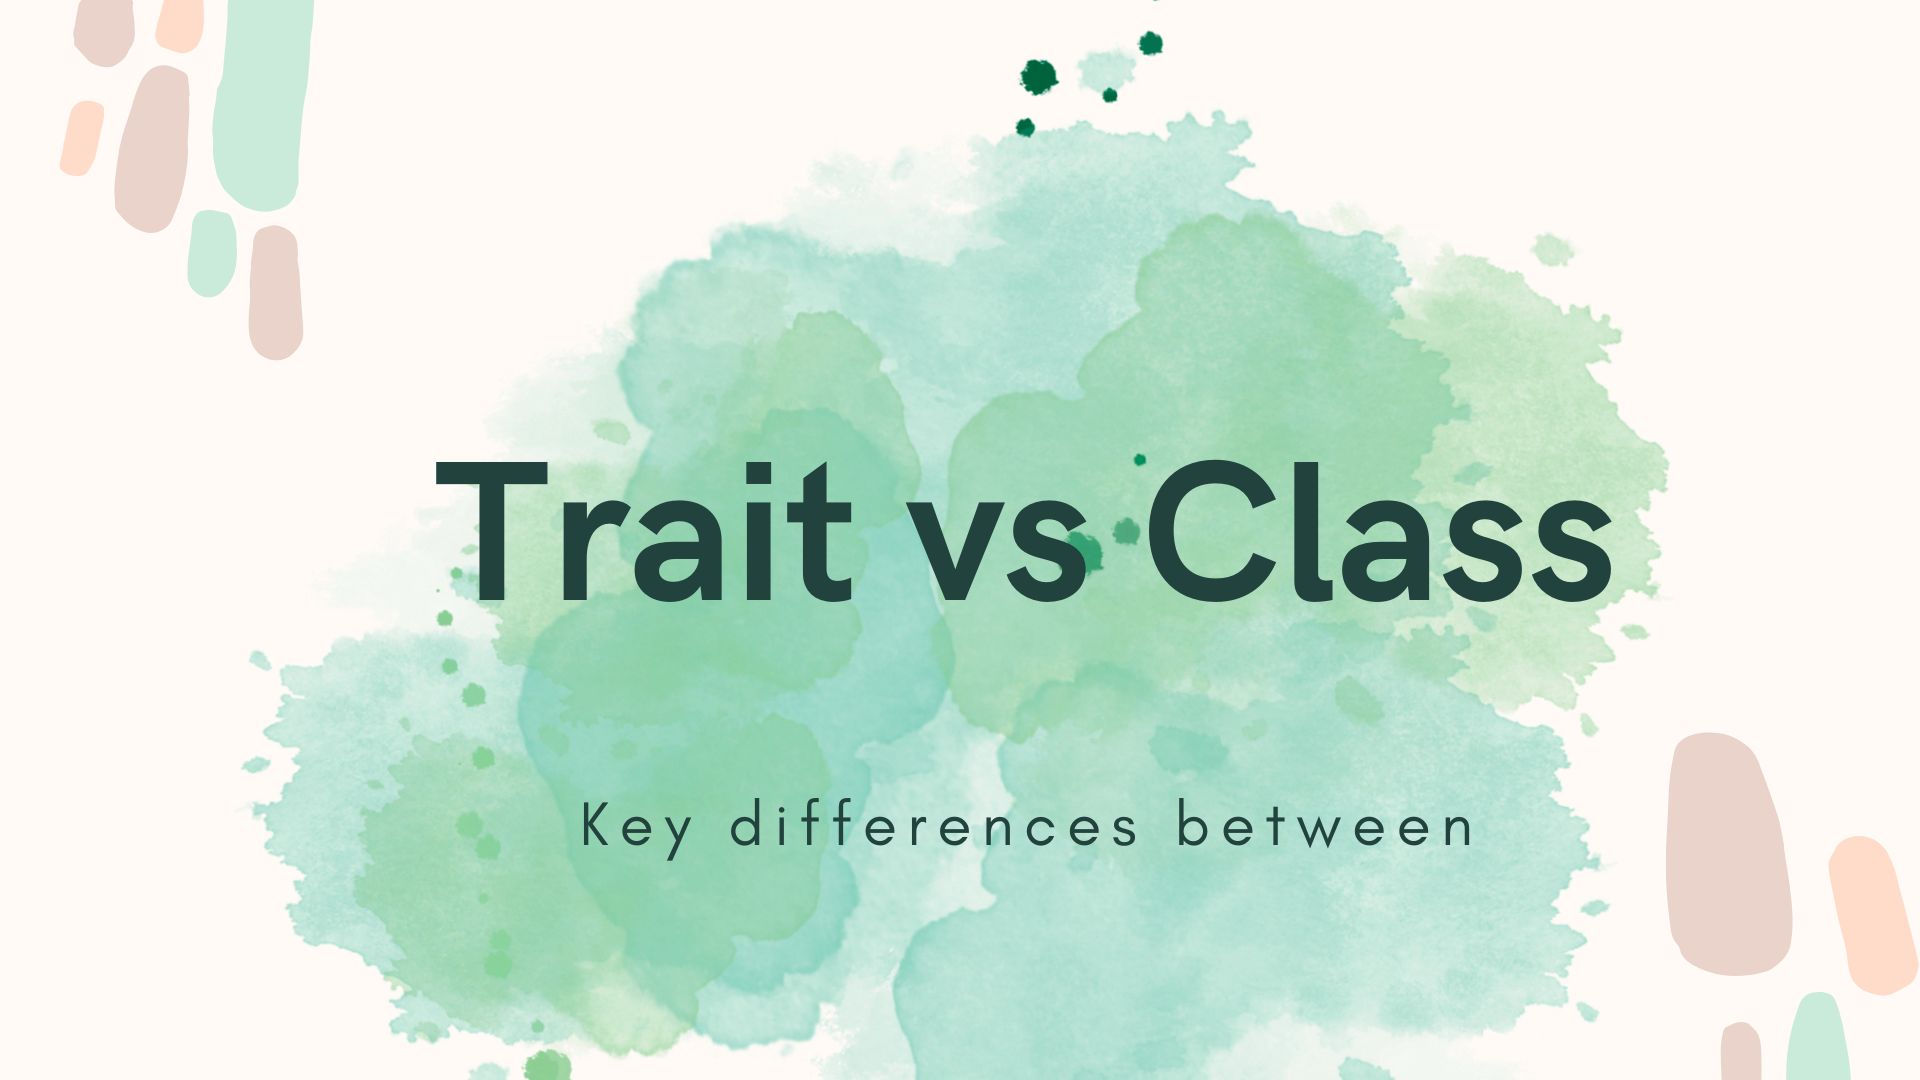 What is the difference between Trait and Class